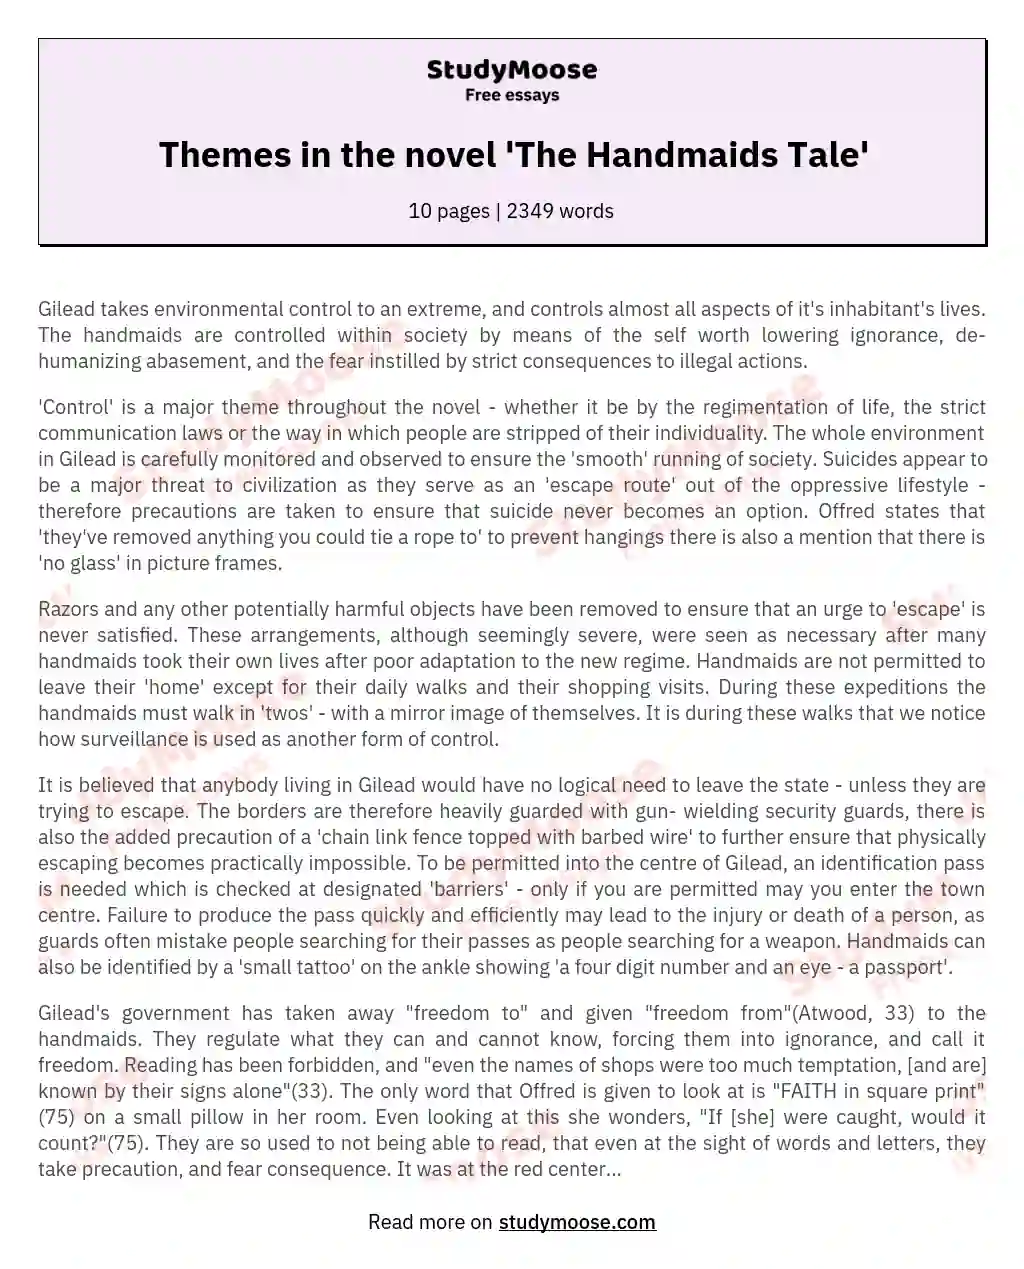 Themes in the novel 'The Handmaids Tale'